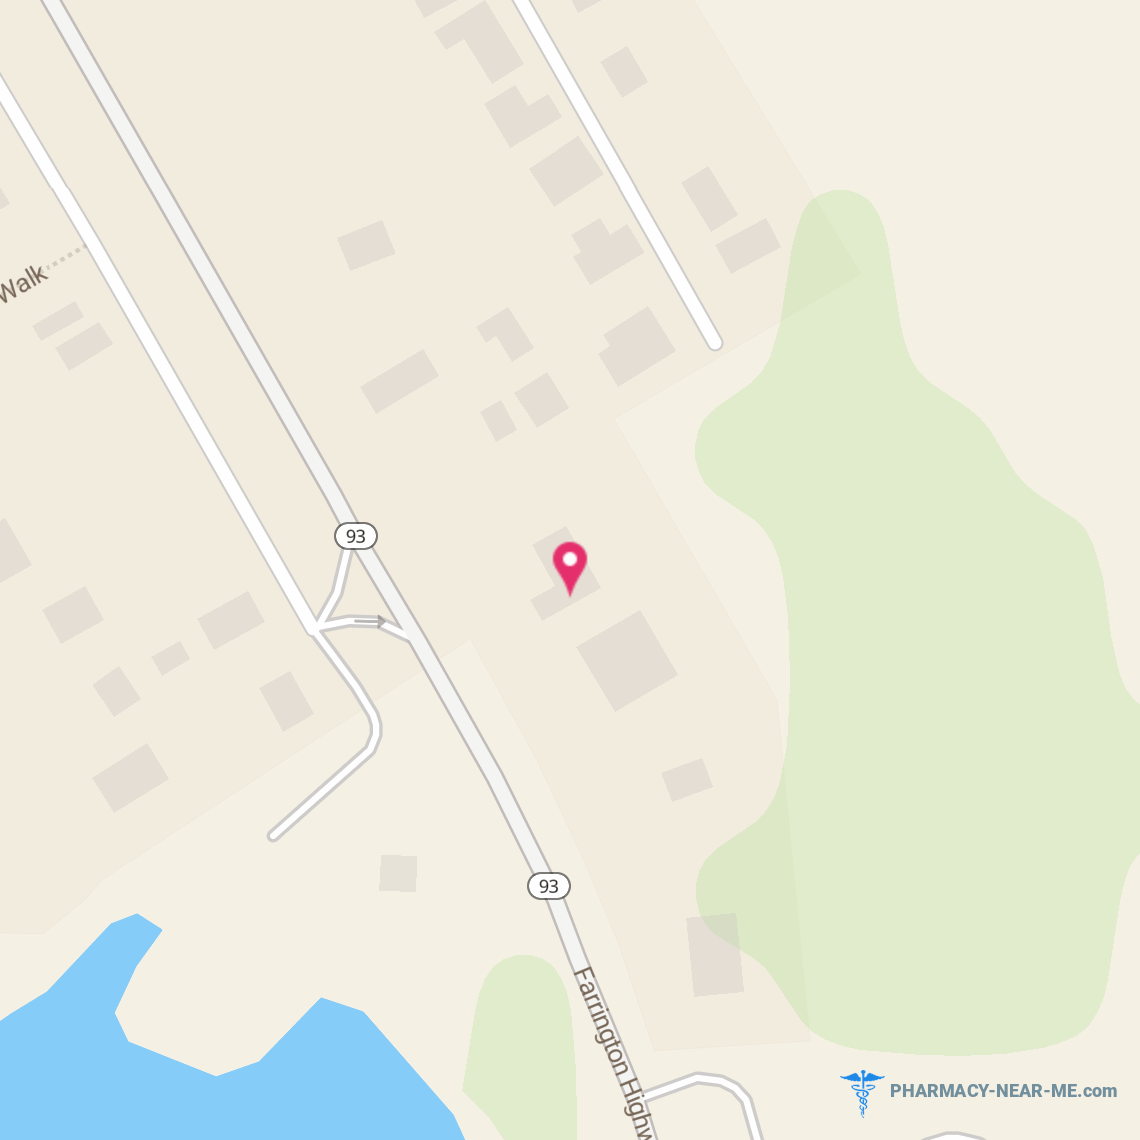 WAIANAE DISTRICT COMPREHENSIVE HEALTH AND HOSPITAL BOARD, INCORPORATED - Pharmacy Hours, Phone, Reviews & Information: 89-102 Farrington Highway, Waianae, Hawaii 96792, United States